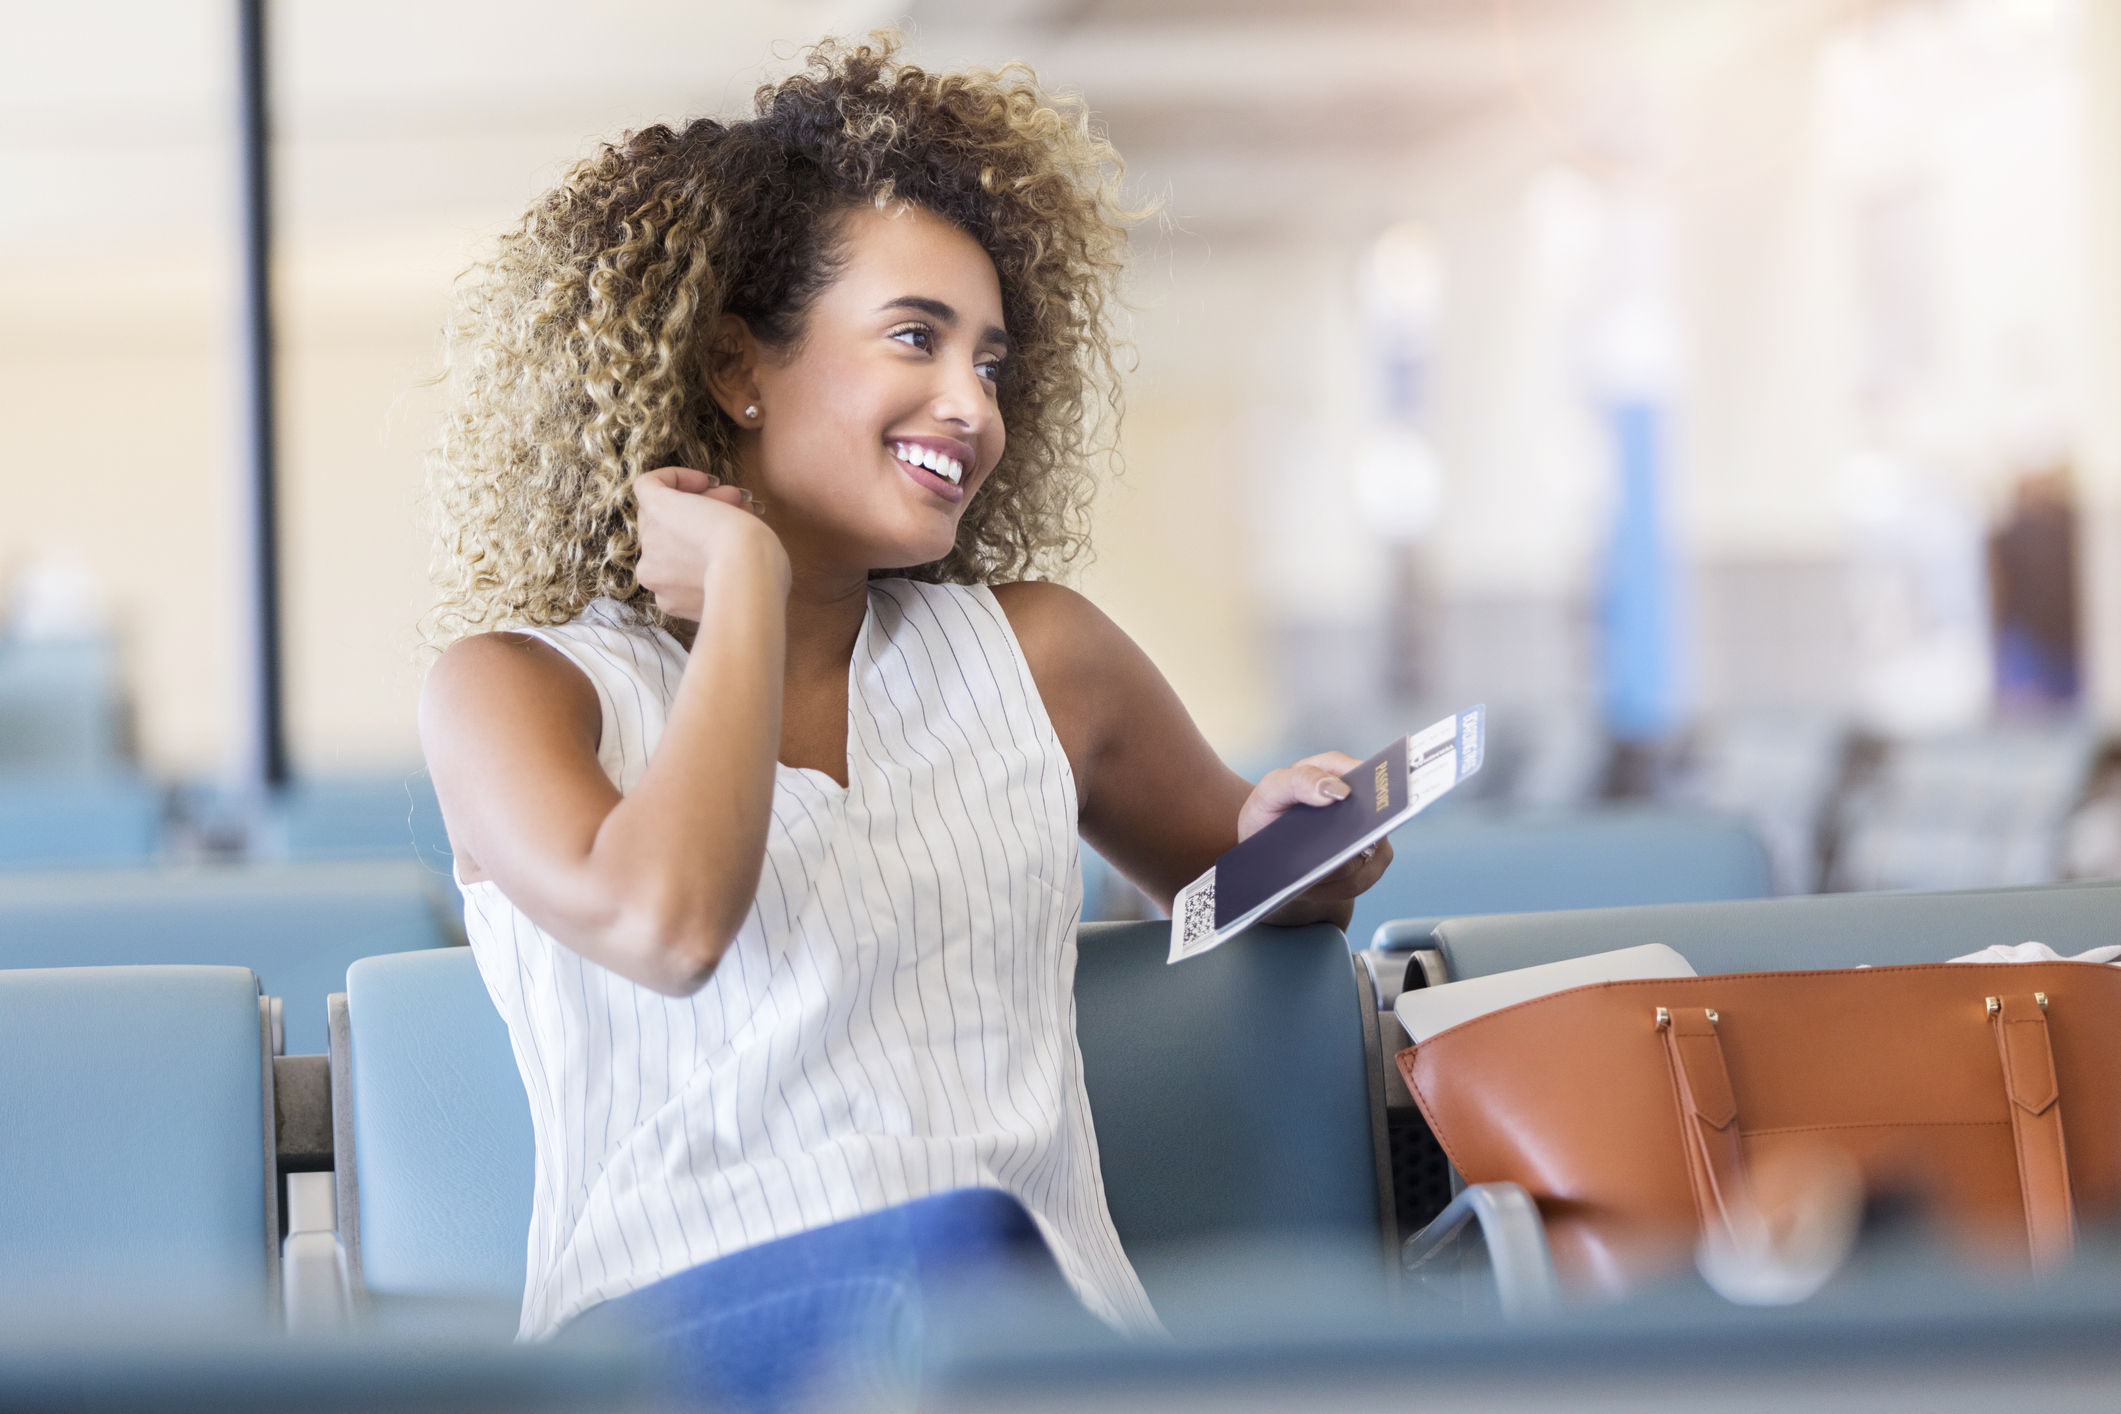 good looking woman waiting in airport, holding passport